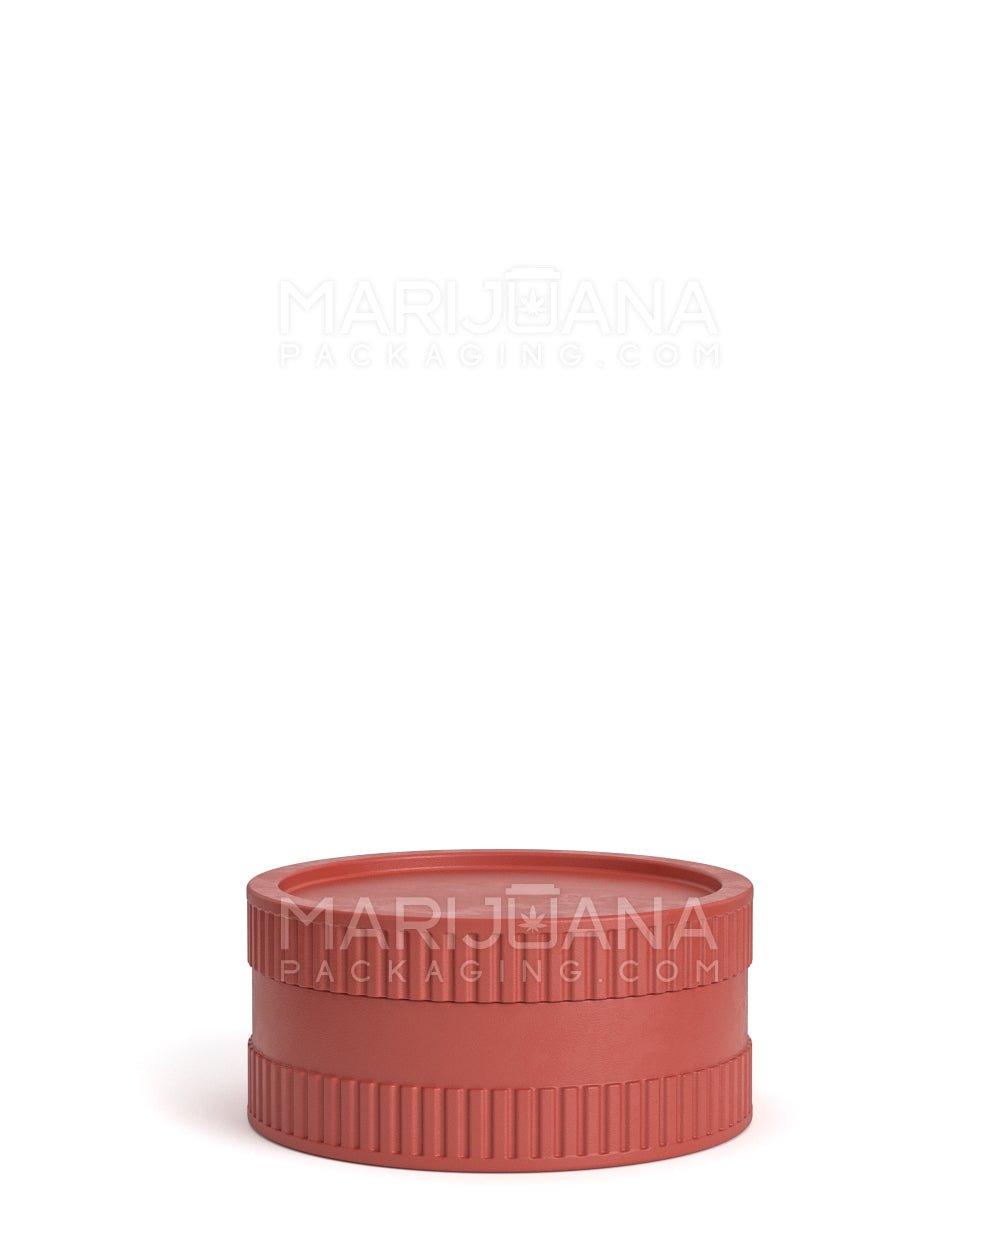 Biodegradable Thick Wall Red Grinder | 2 Piece - 55mm - 12 Count - 3